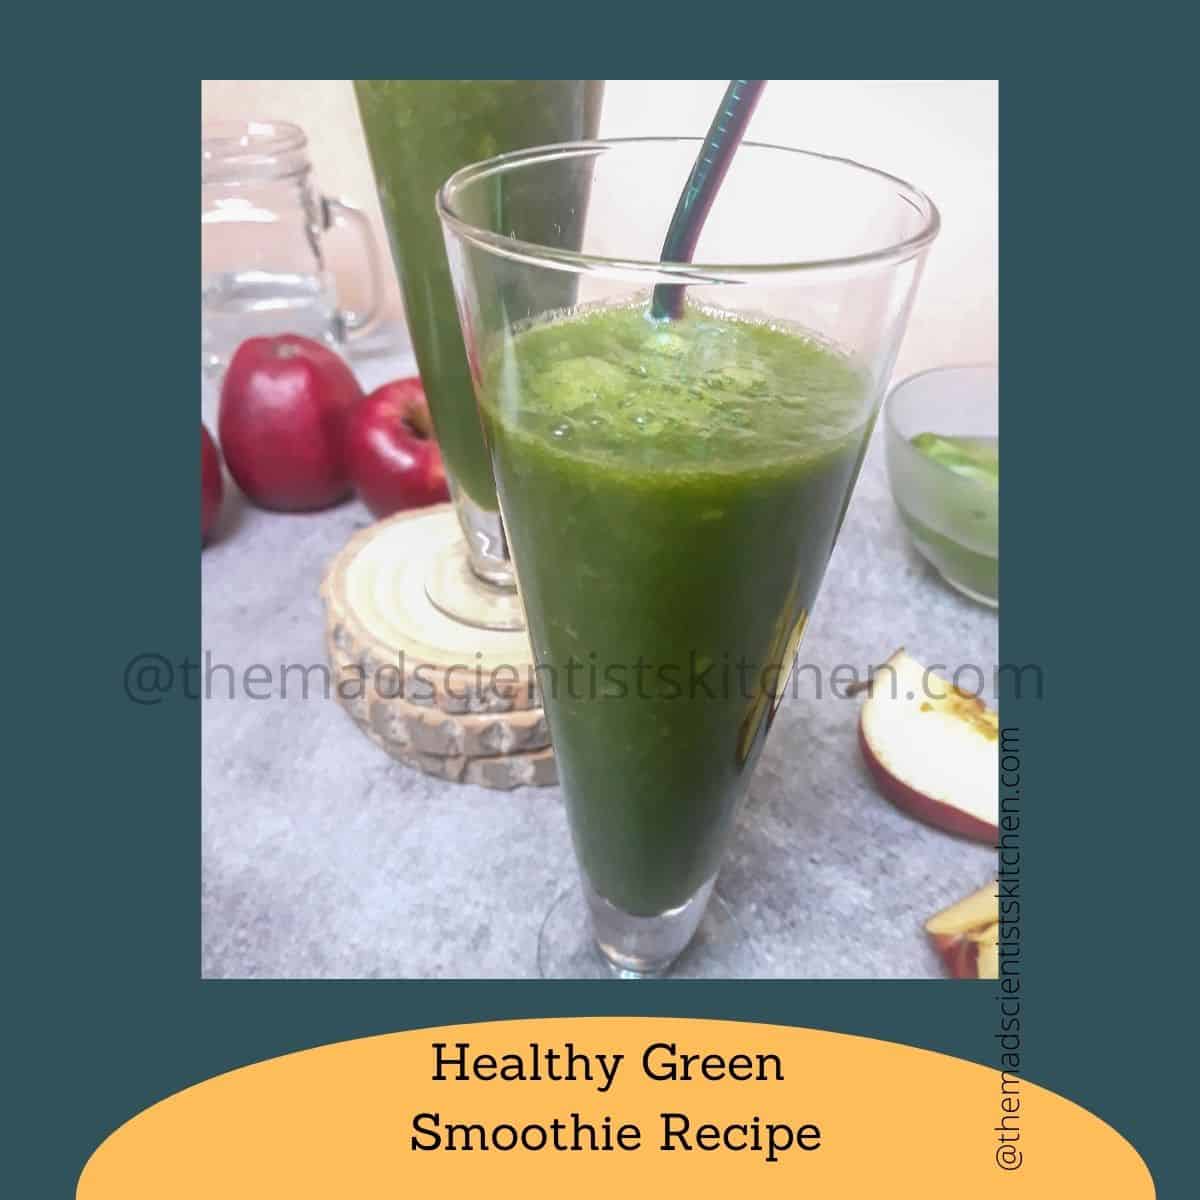 Easy and simple Green smoothie with minimum ingredients and our favourite.